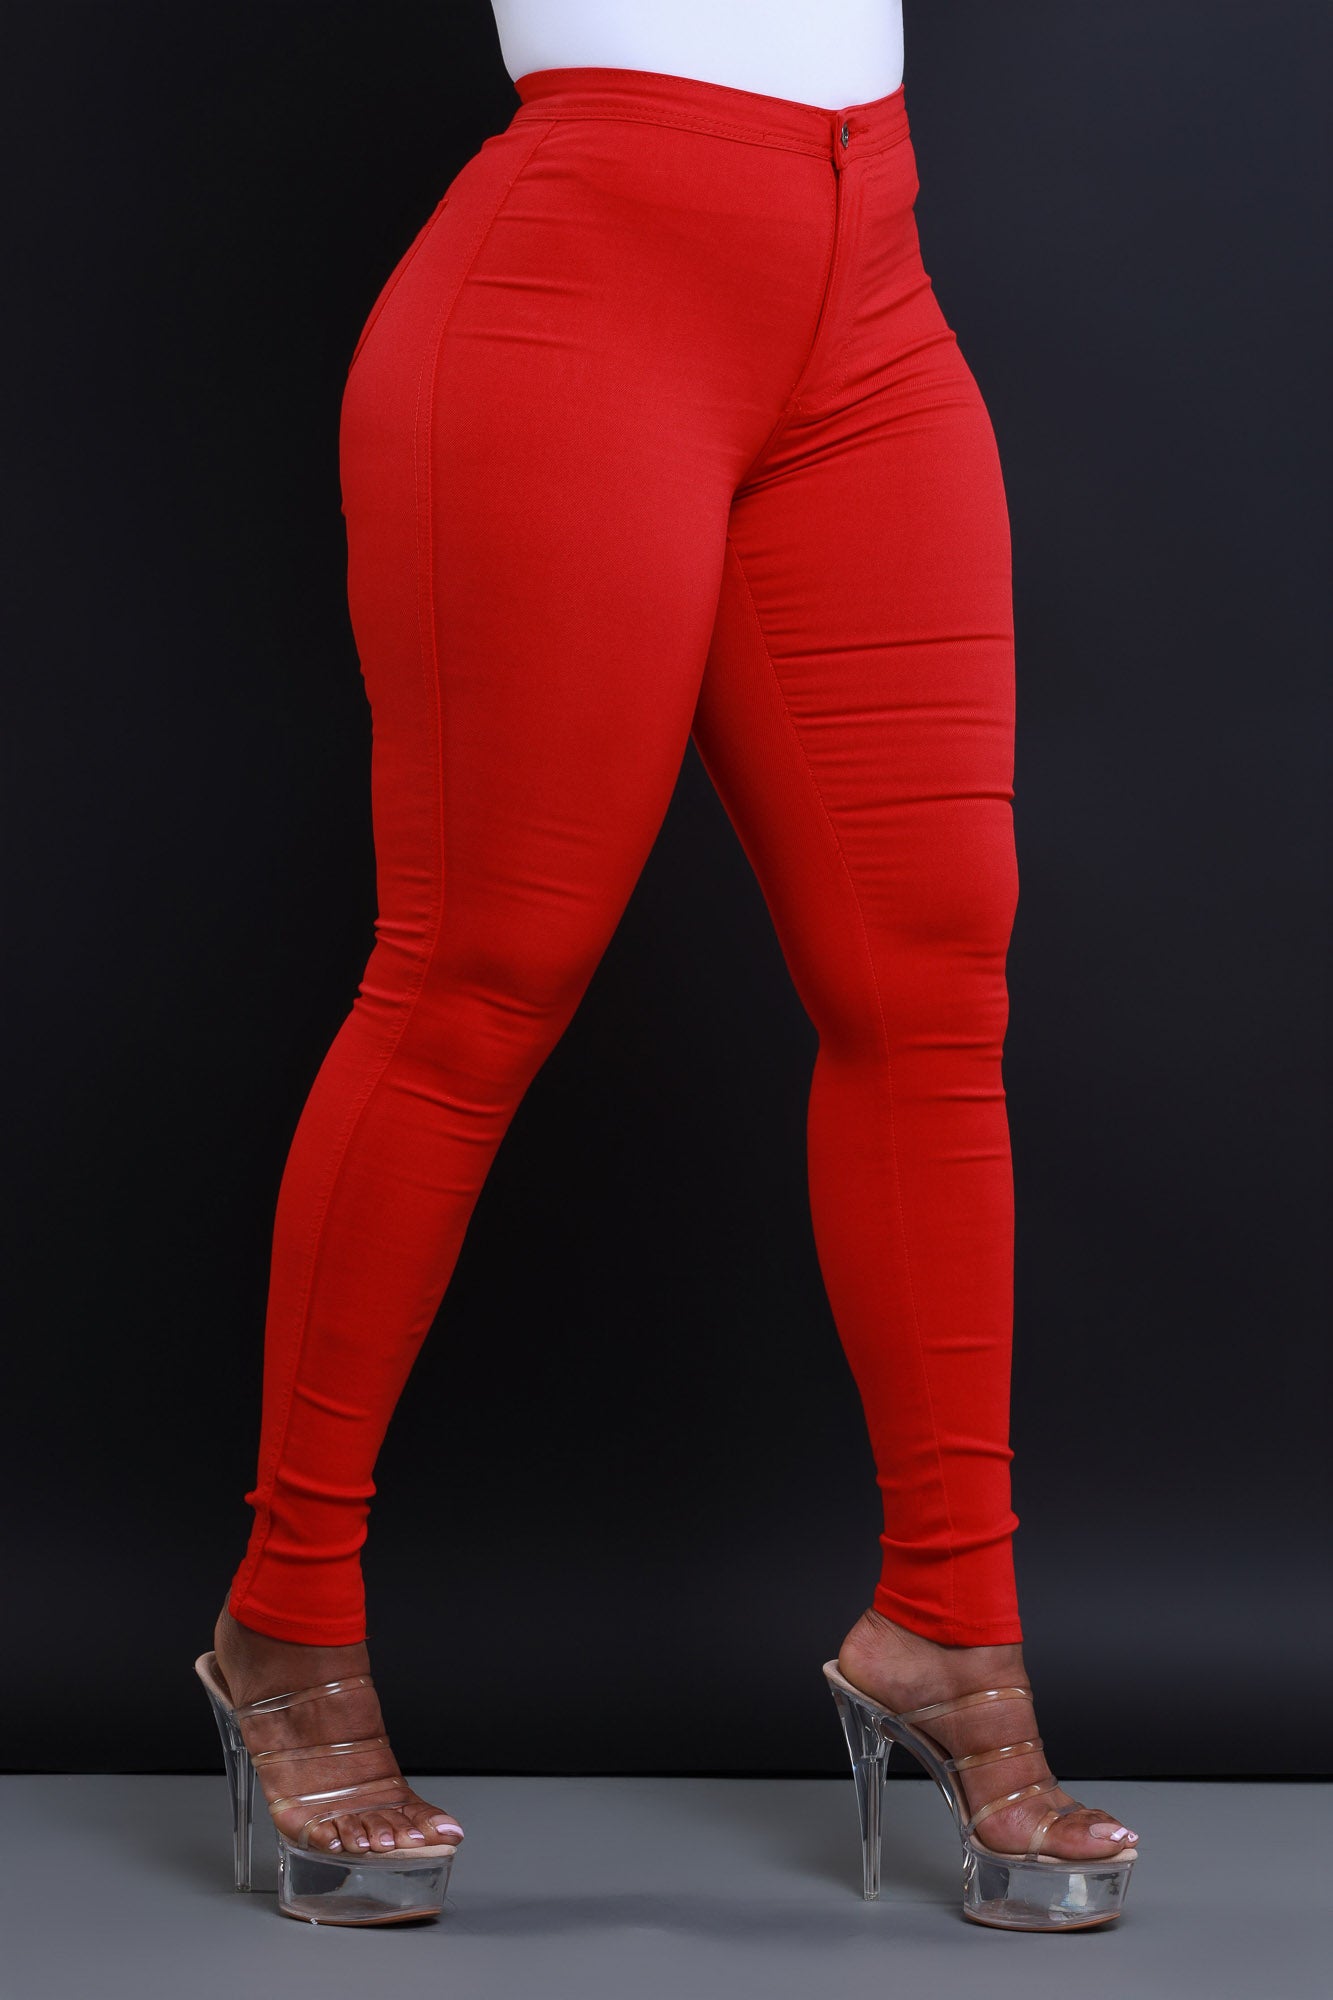 Super Swank High Waist Stretchy Jeans - Red